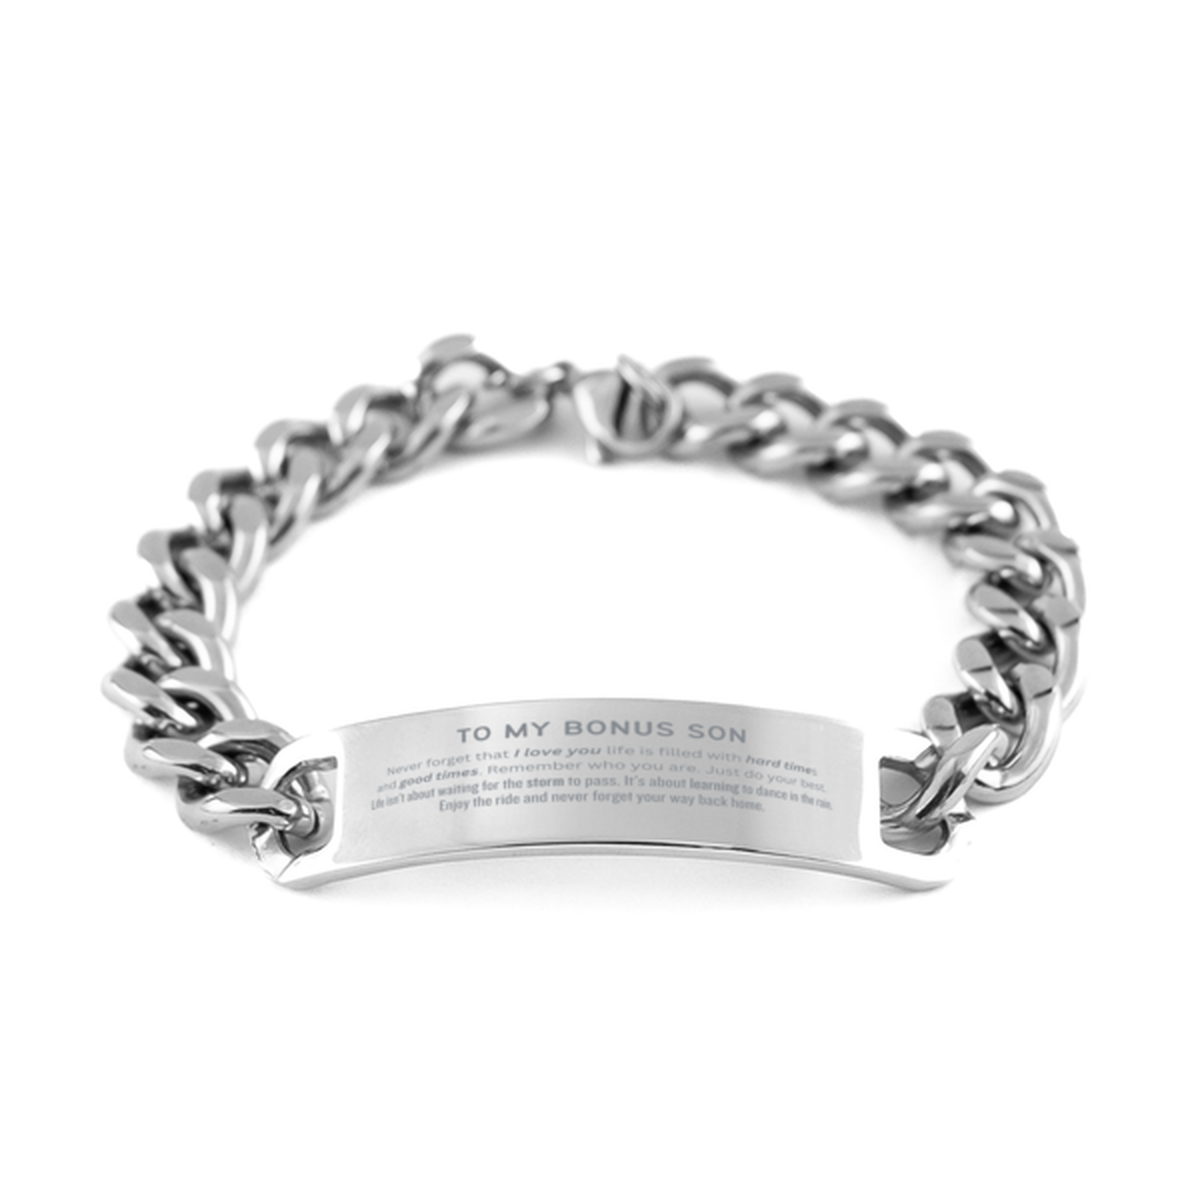 Christmas Bonus Son Cuban Chain Stainless Steel Bracelet Gifts, To My Bonus Son Birthday Thank You Gifts For Bonus Son, Graduation Unique Gifts For Bonus Son To My Bonus Son Never forget that I love you life is filled with hard times and good times. Remem